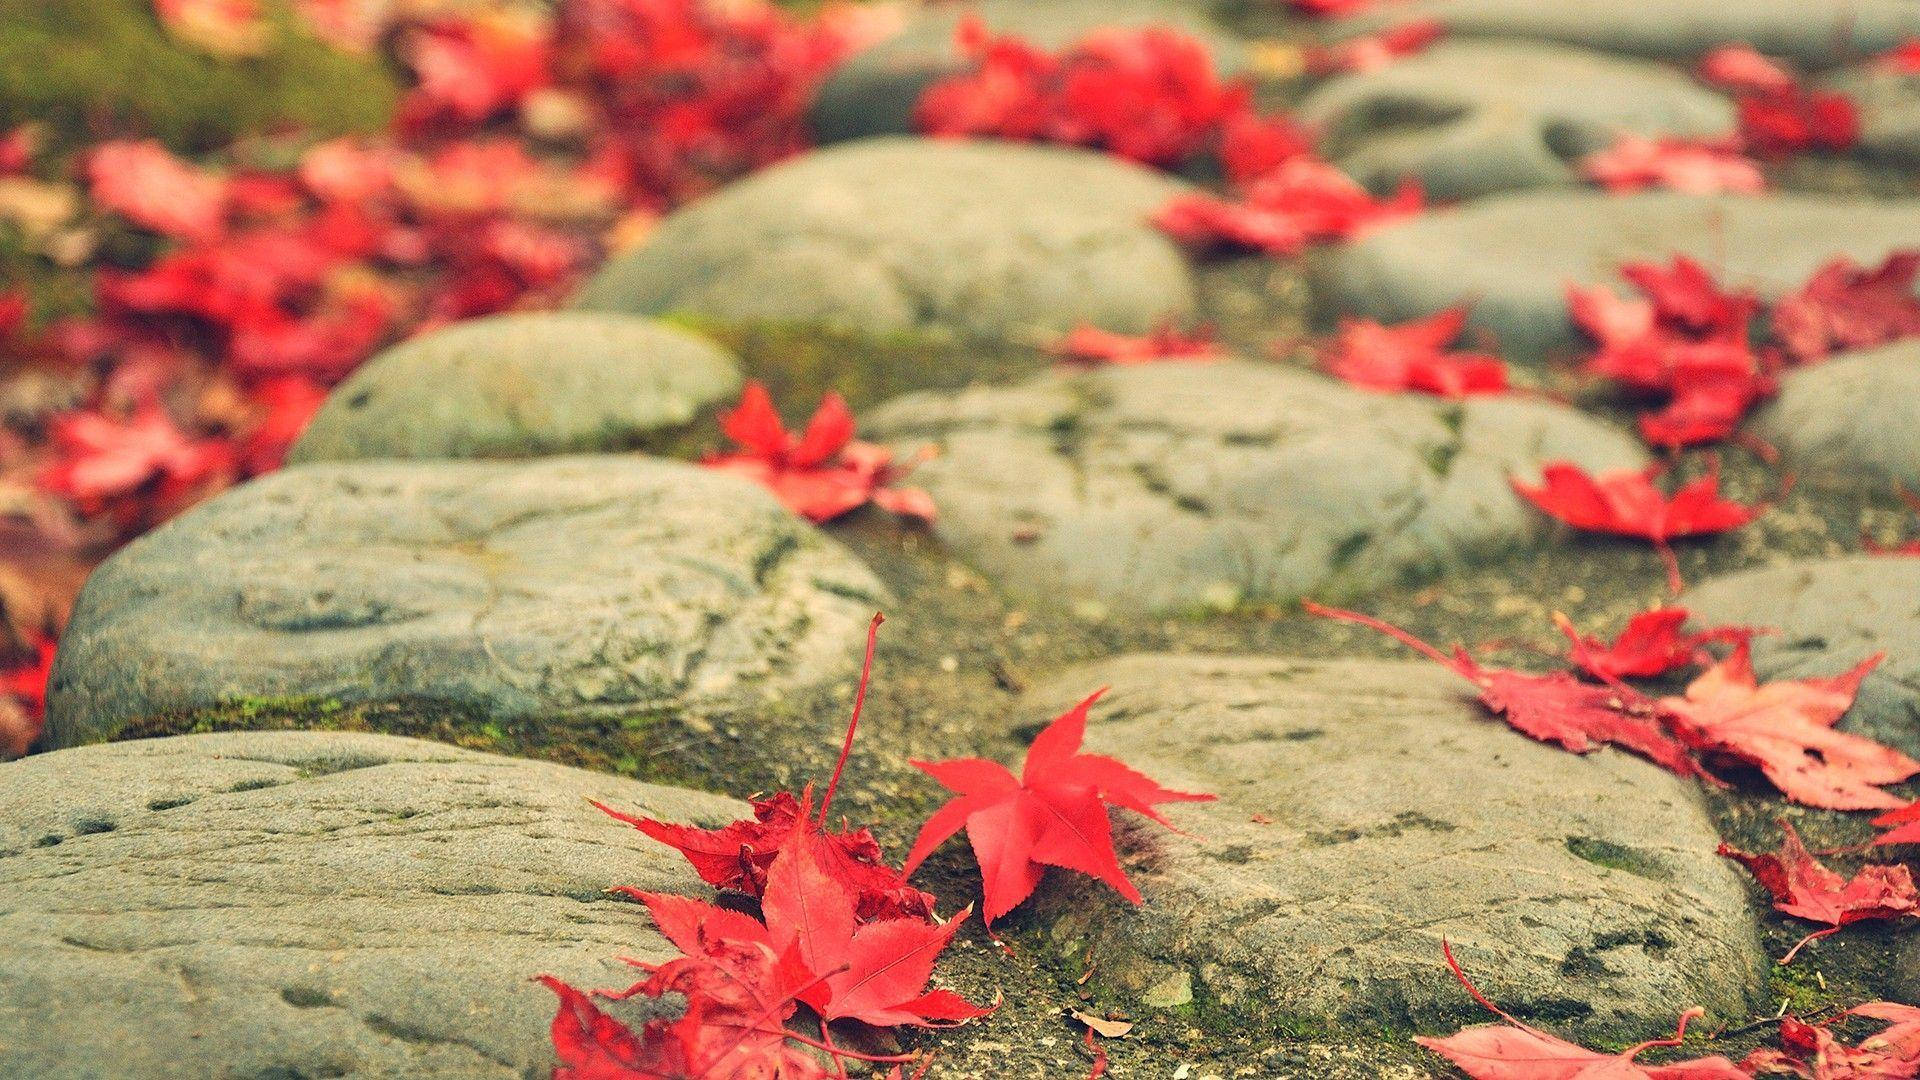 1080p Hd Maple Leaves On Cobble Stone Path Background